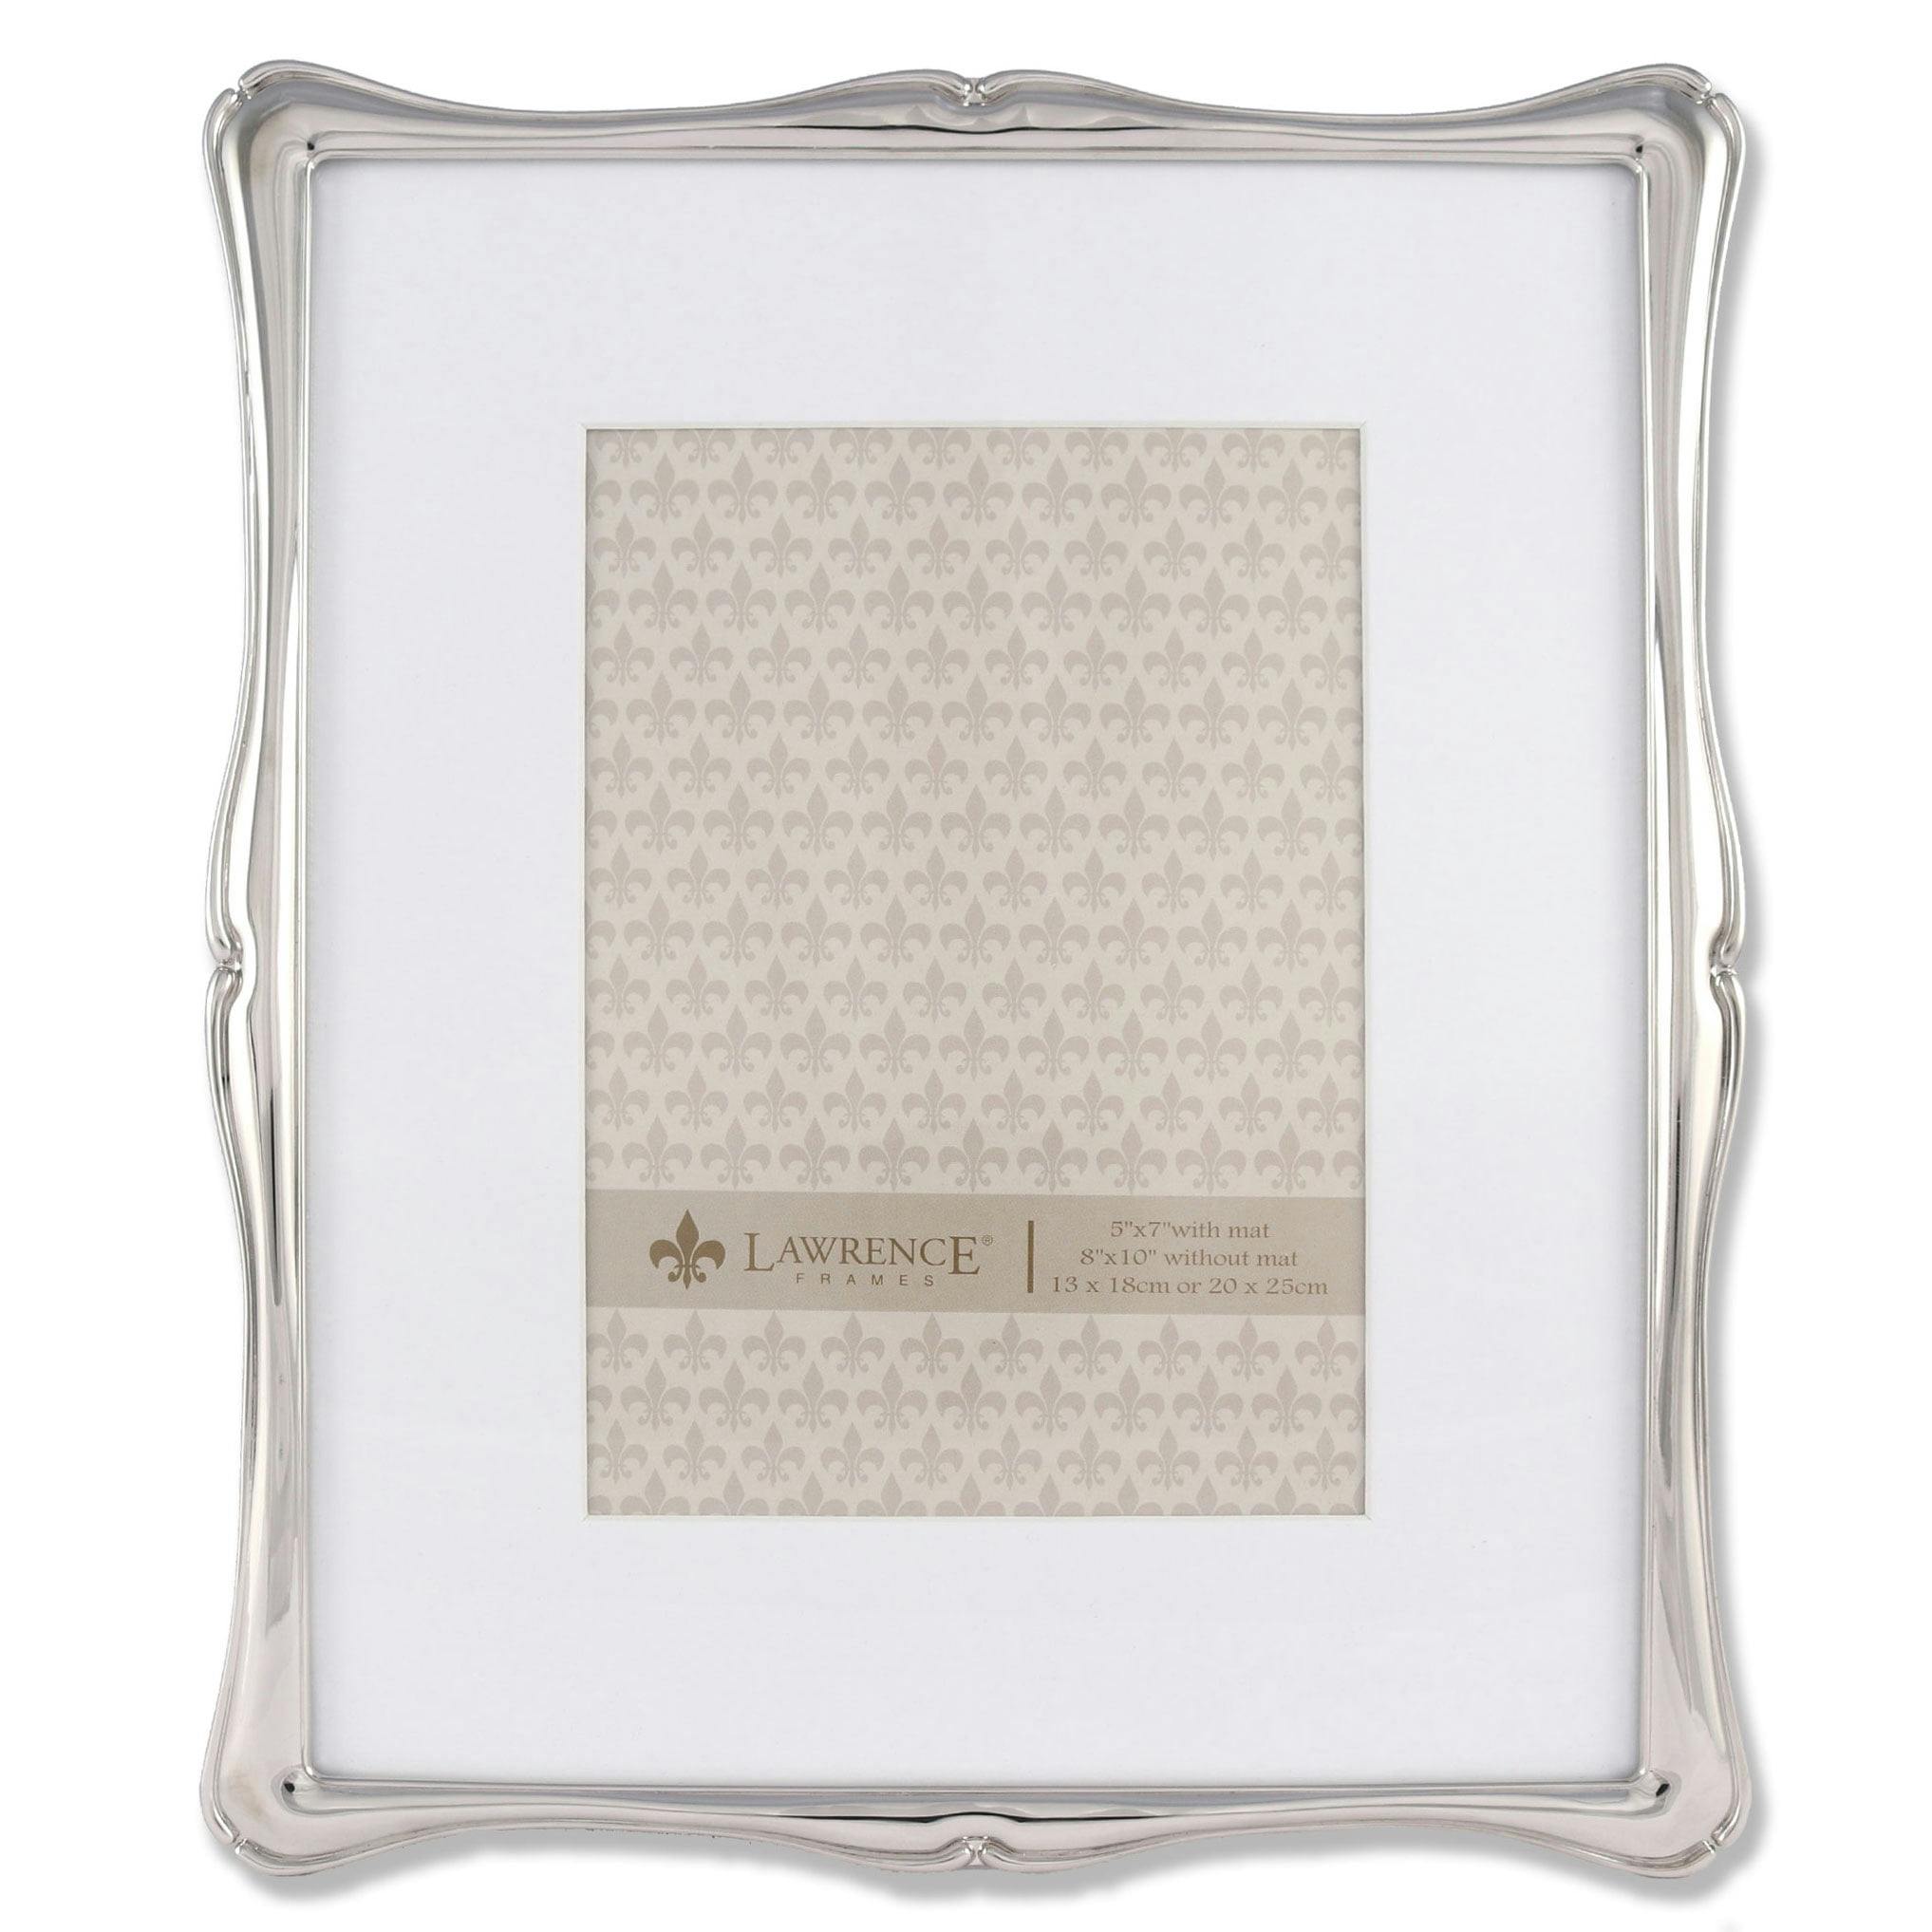 Elegant Silver Metal 8x10 Matted Picture Frame for 5x7 Photos